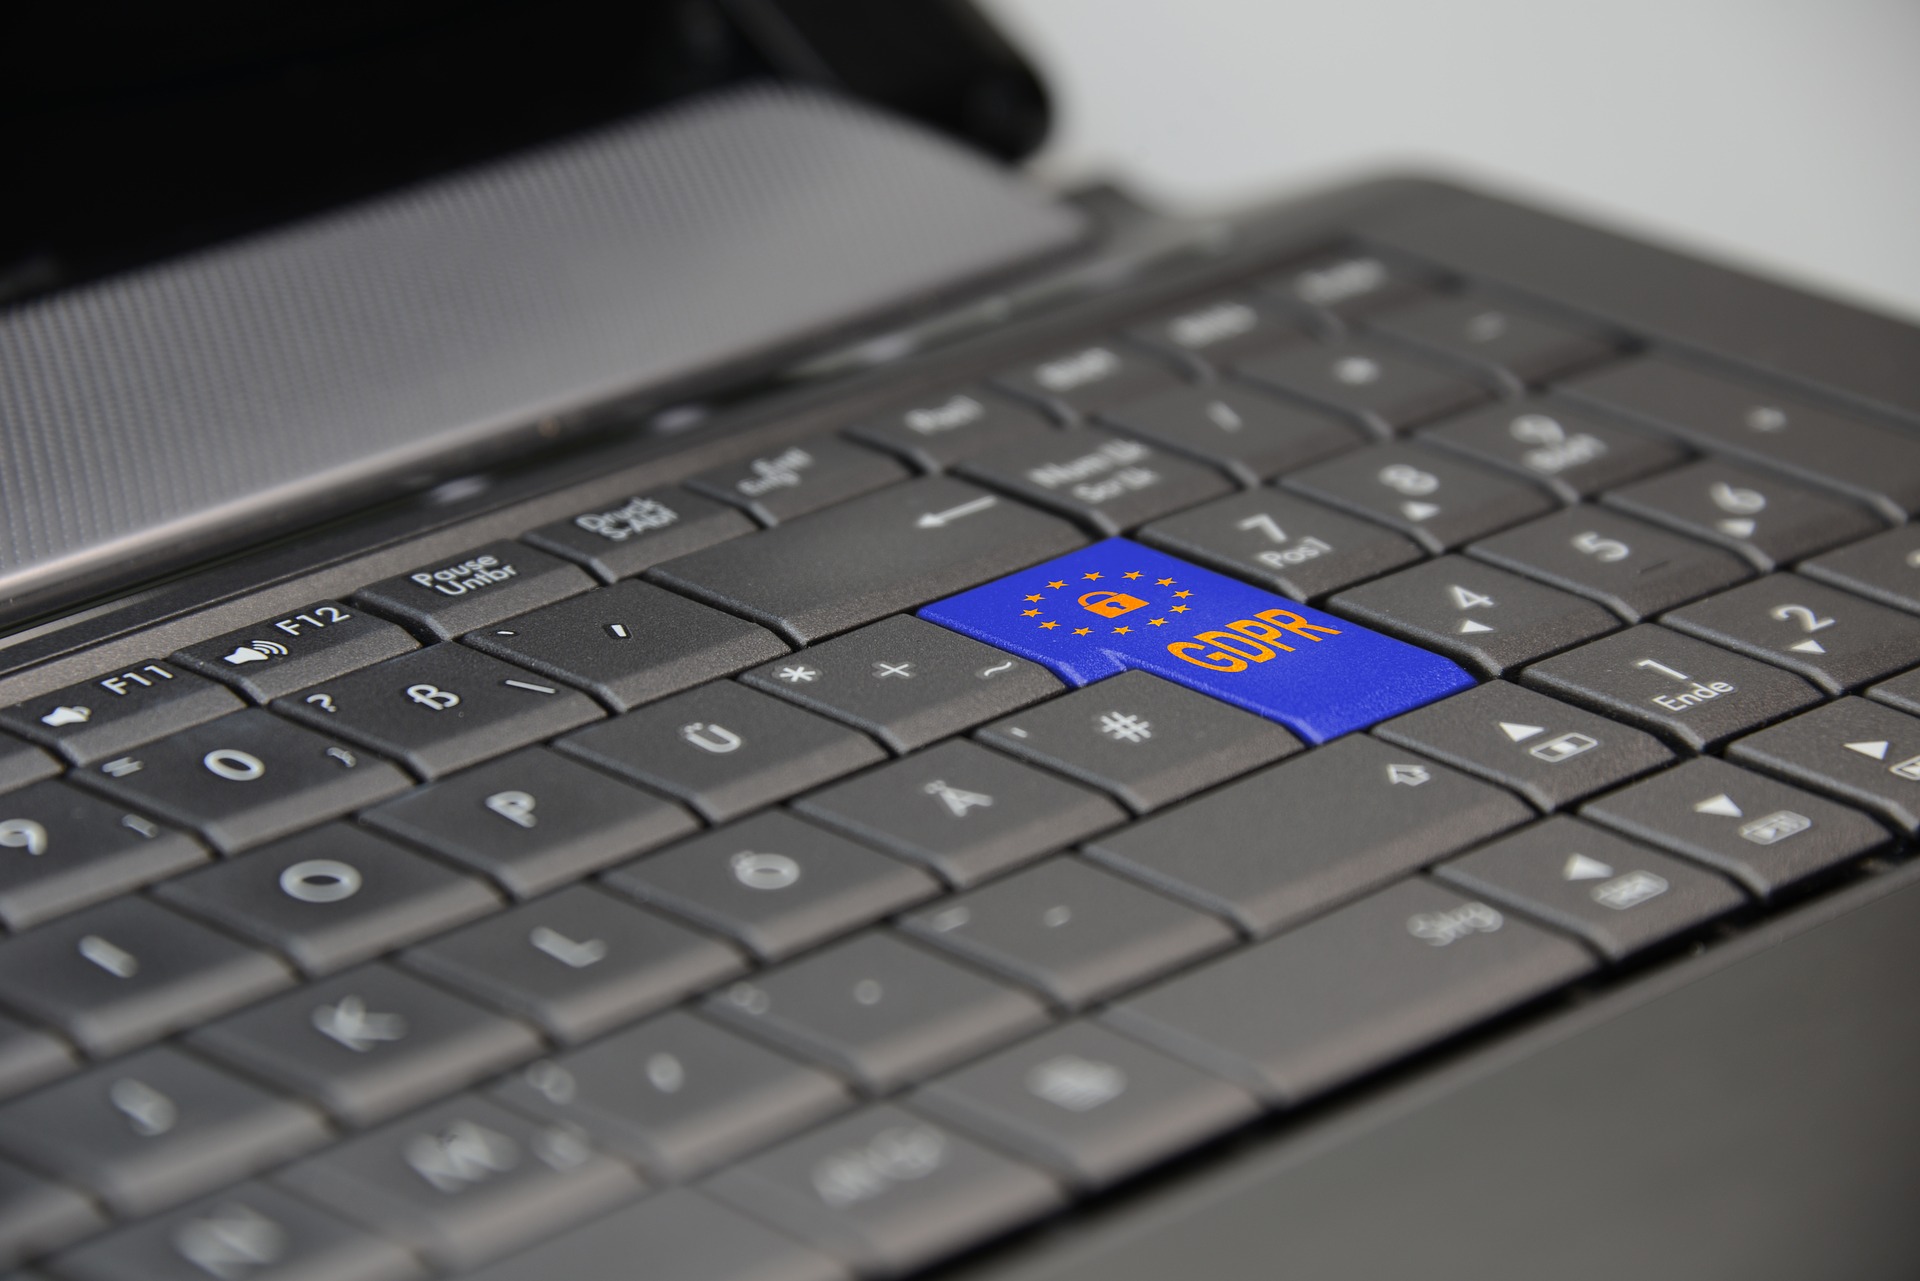 Working From Home vs Back In The Office: How To Follow Best GDPR Practice